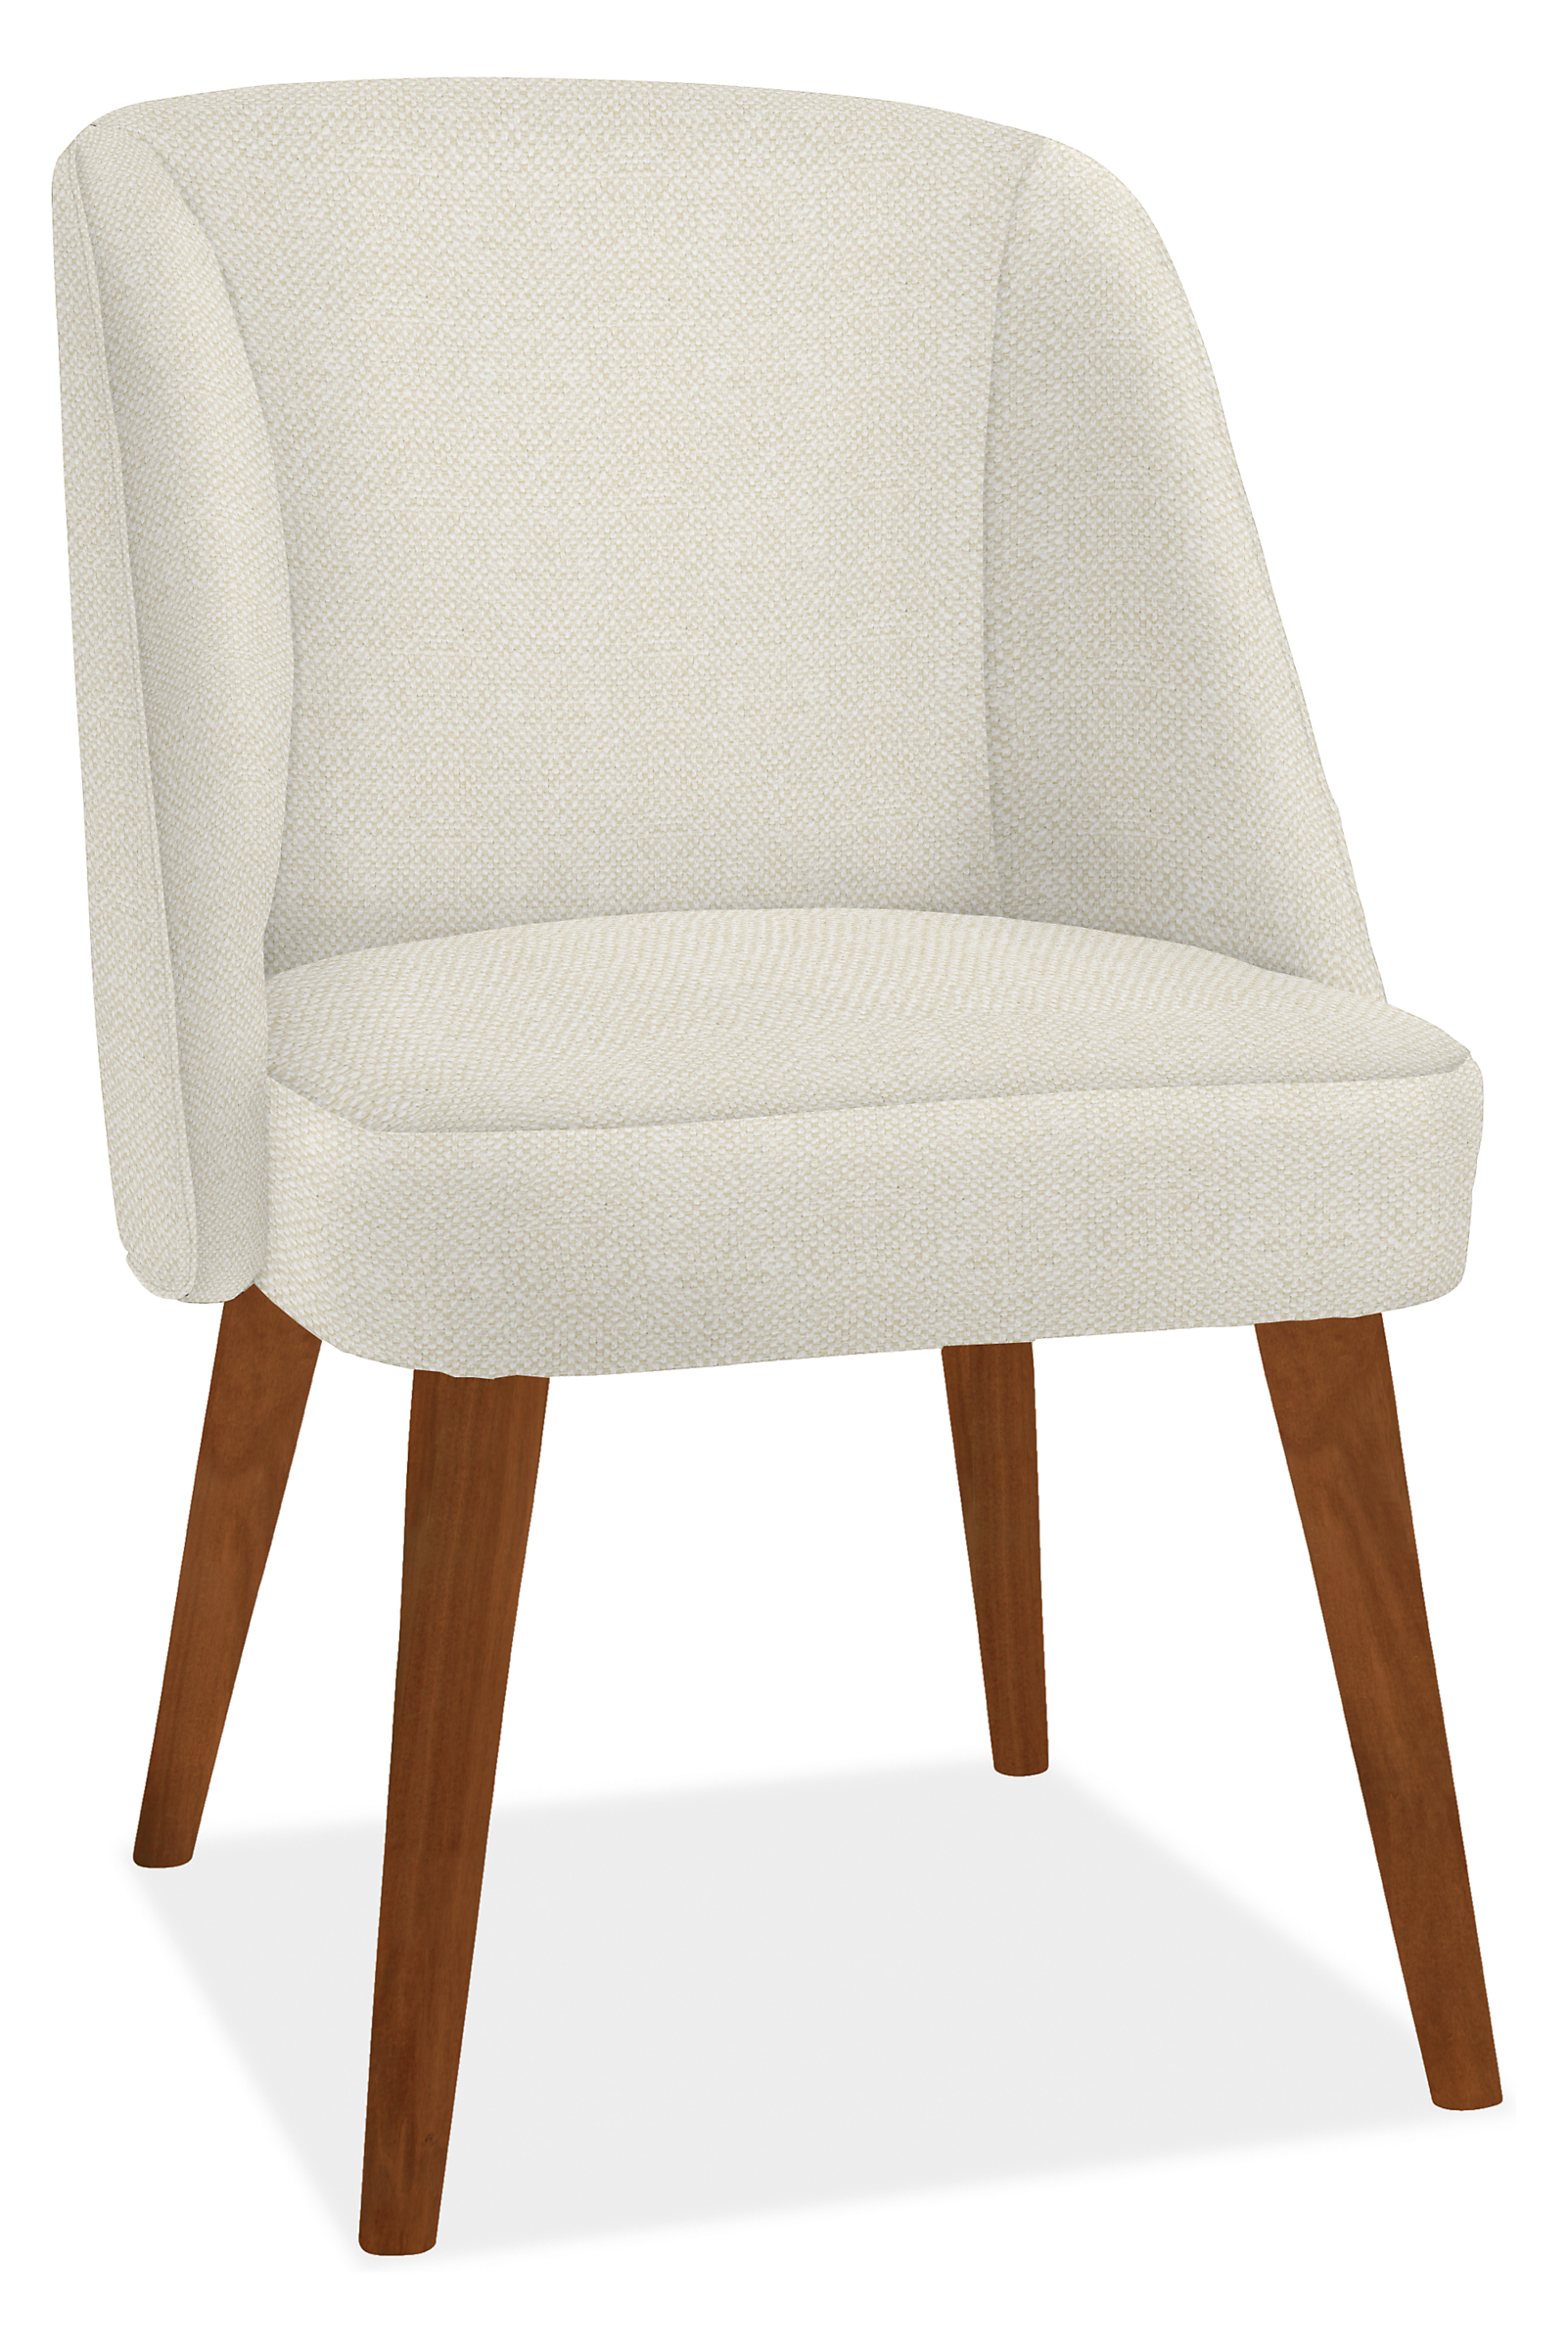 Cora Side Chair in Arin Ivory with Mocha Legs